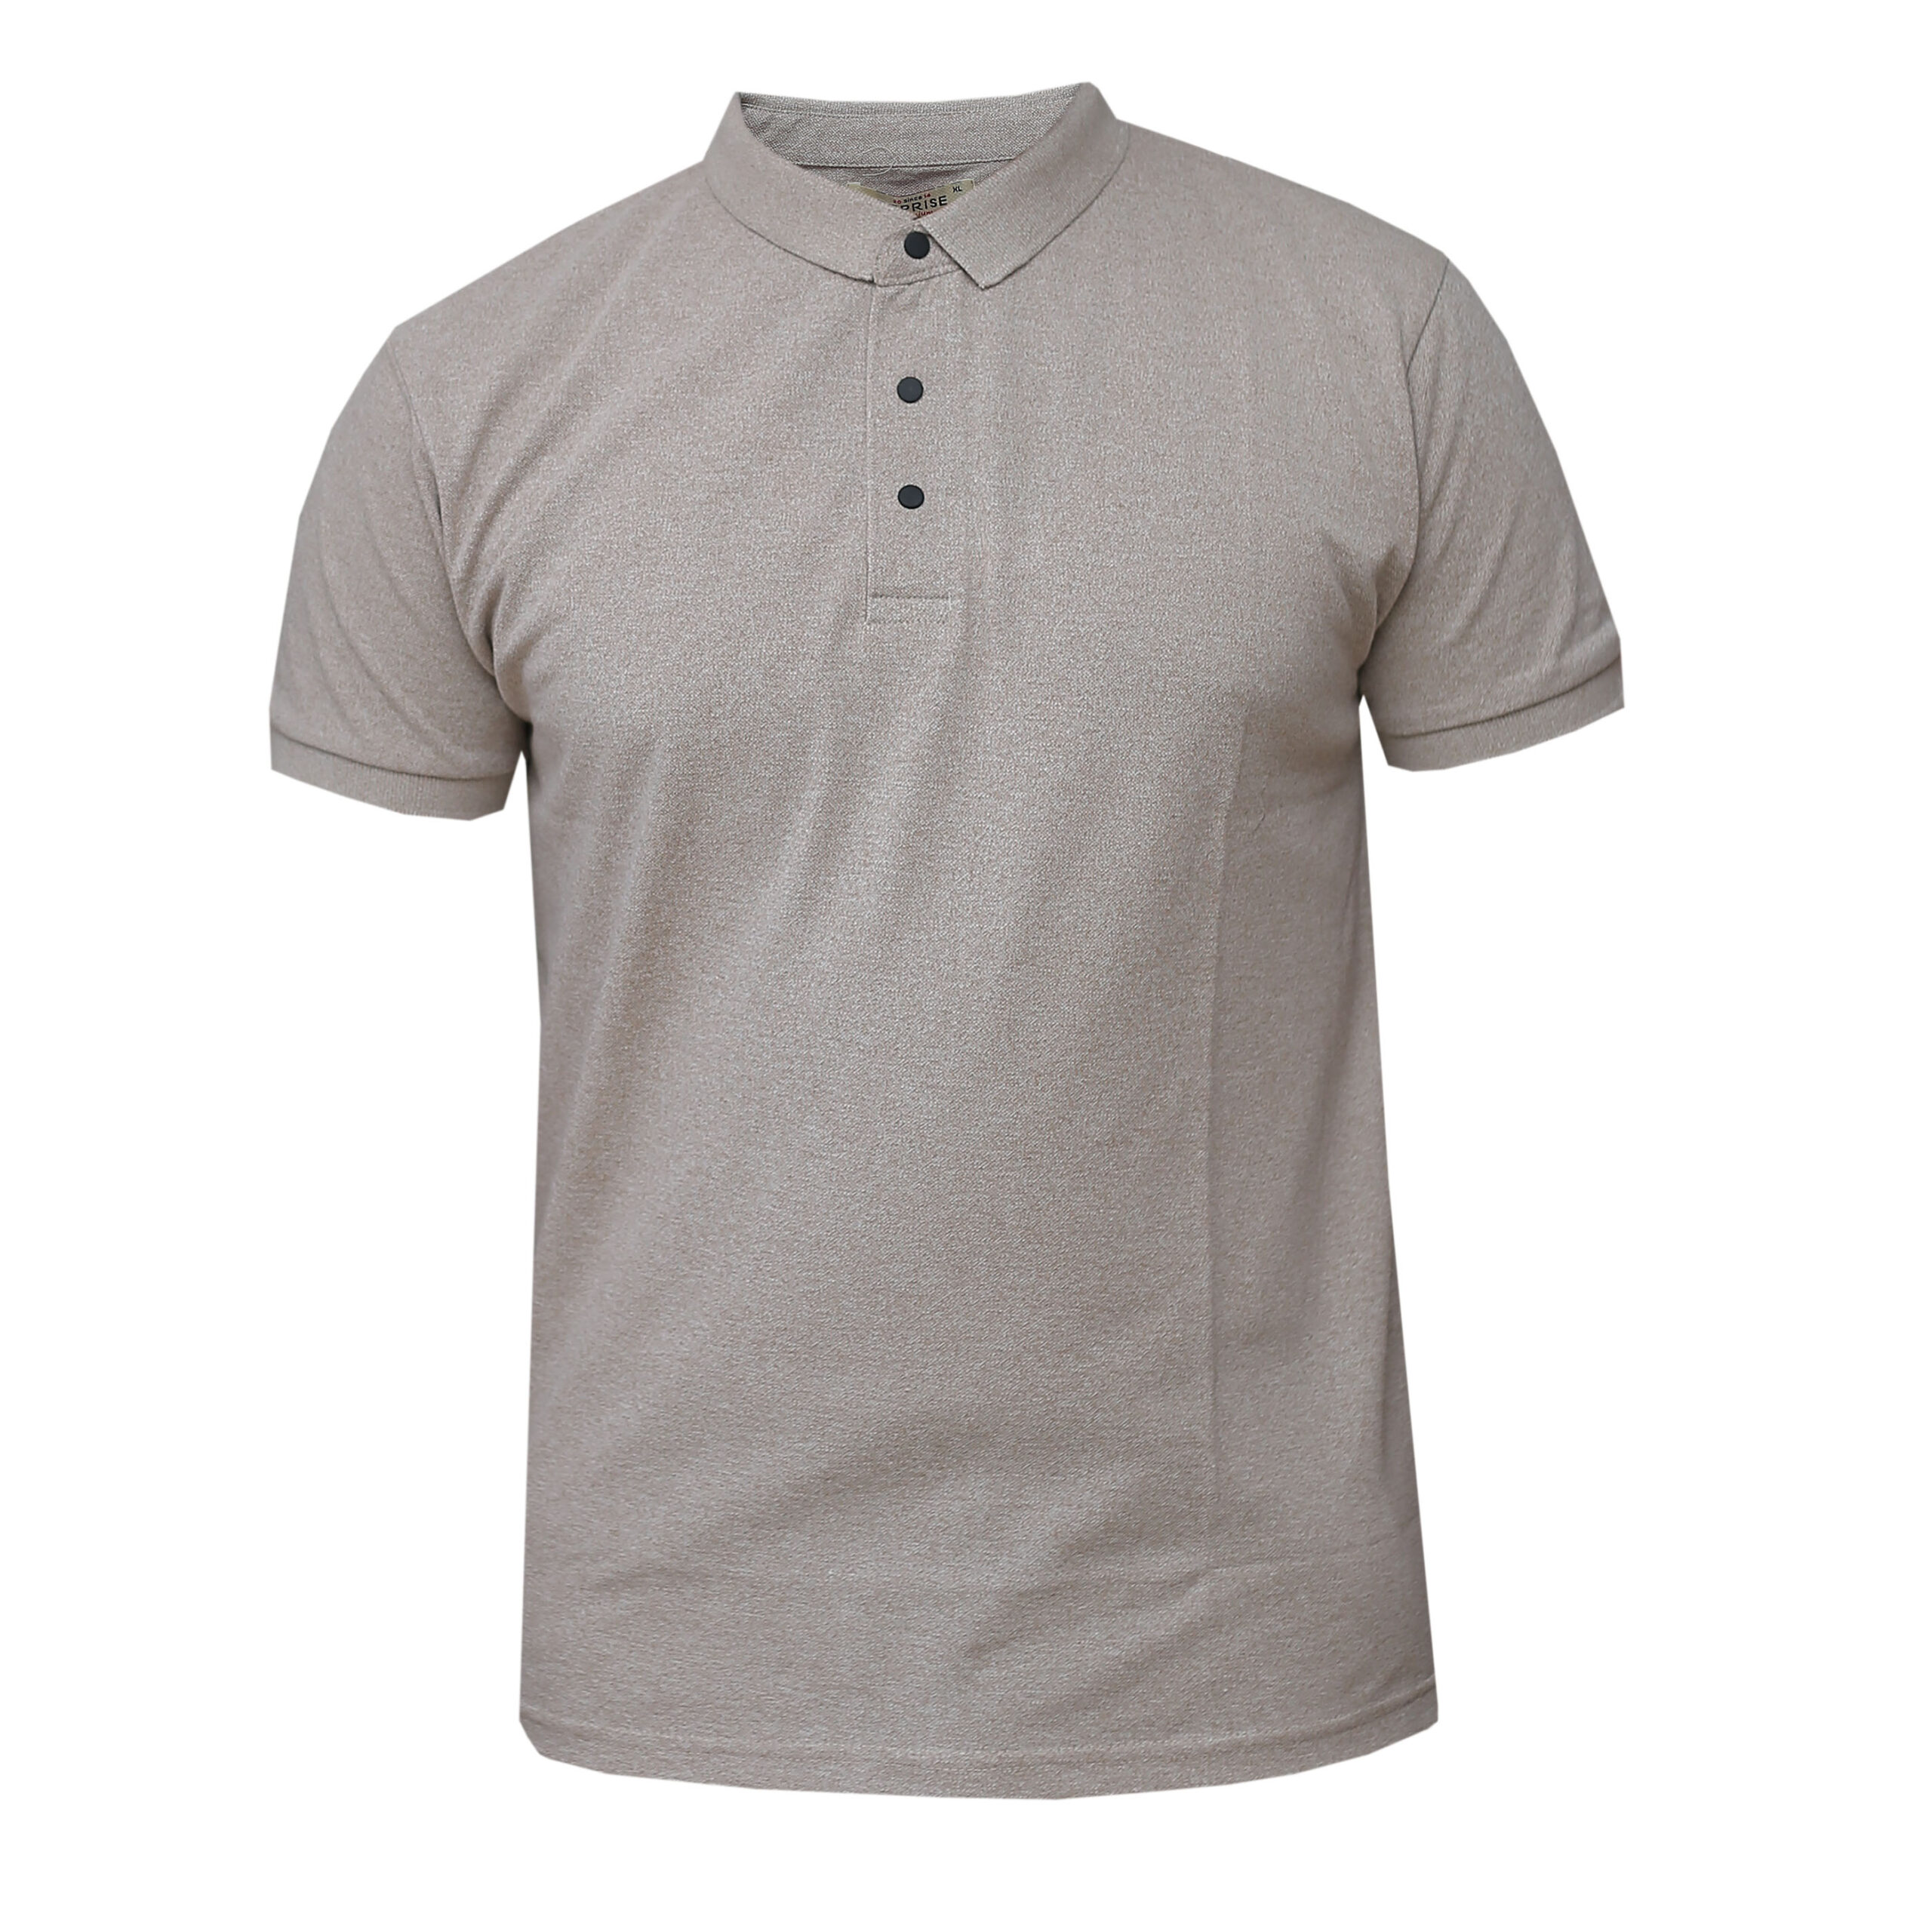 Collar T-Shirt for Men - Polo T-Shirts Casual Wear for Men